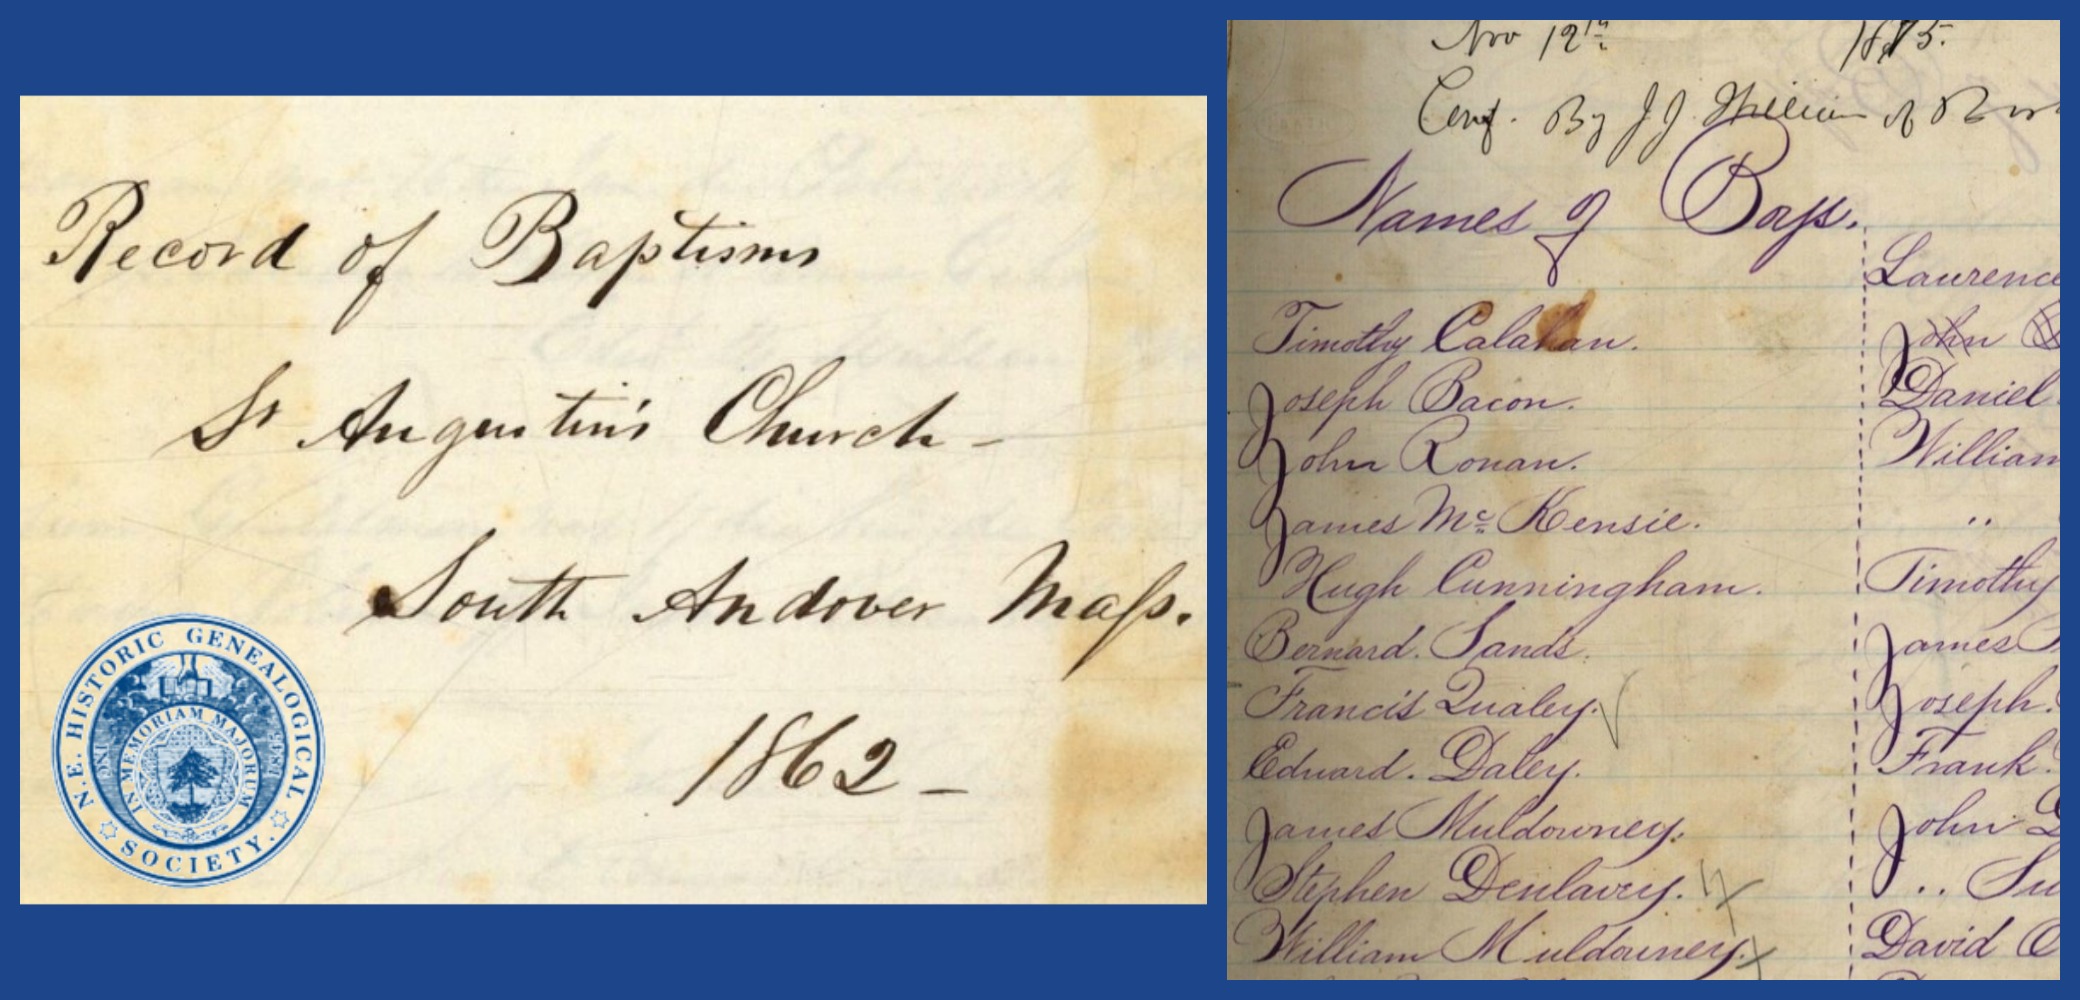 Archdiocese of Boston Roman Catholic Records from New England Historic Genealogical Society